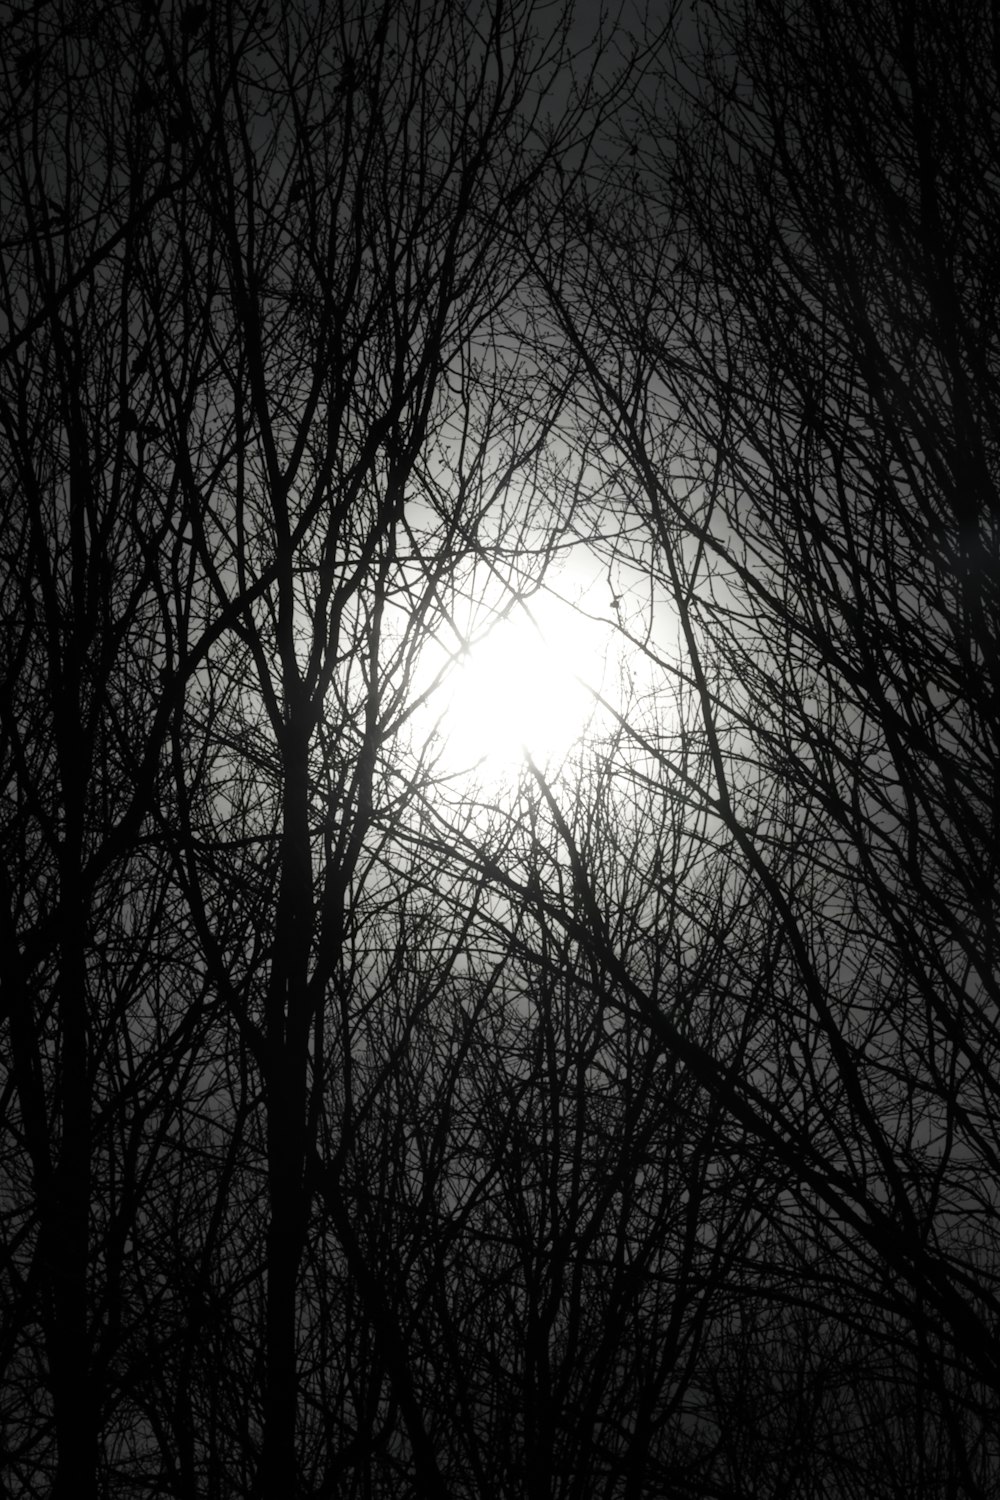 a black and white photo of the sun through the trees